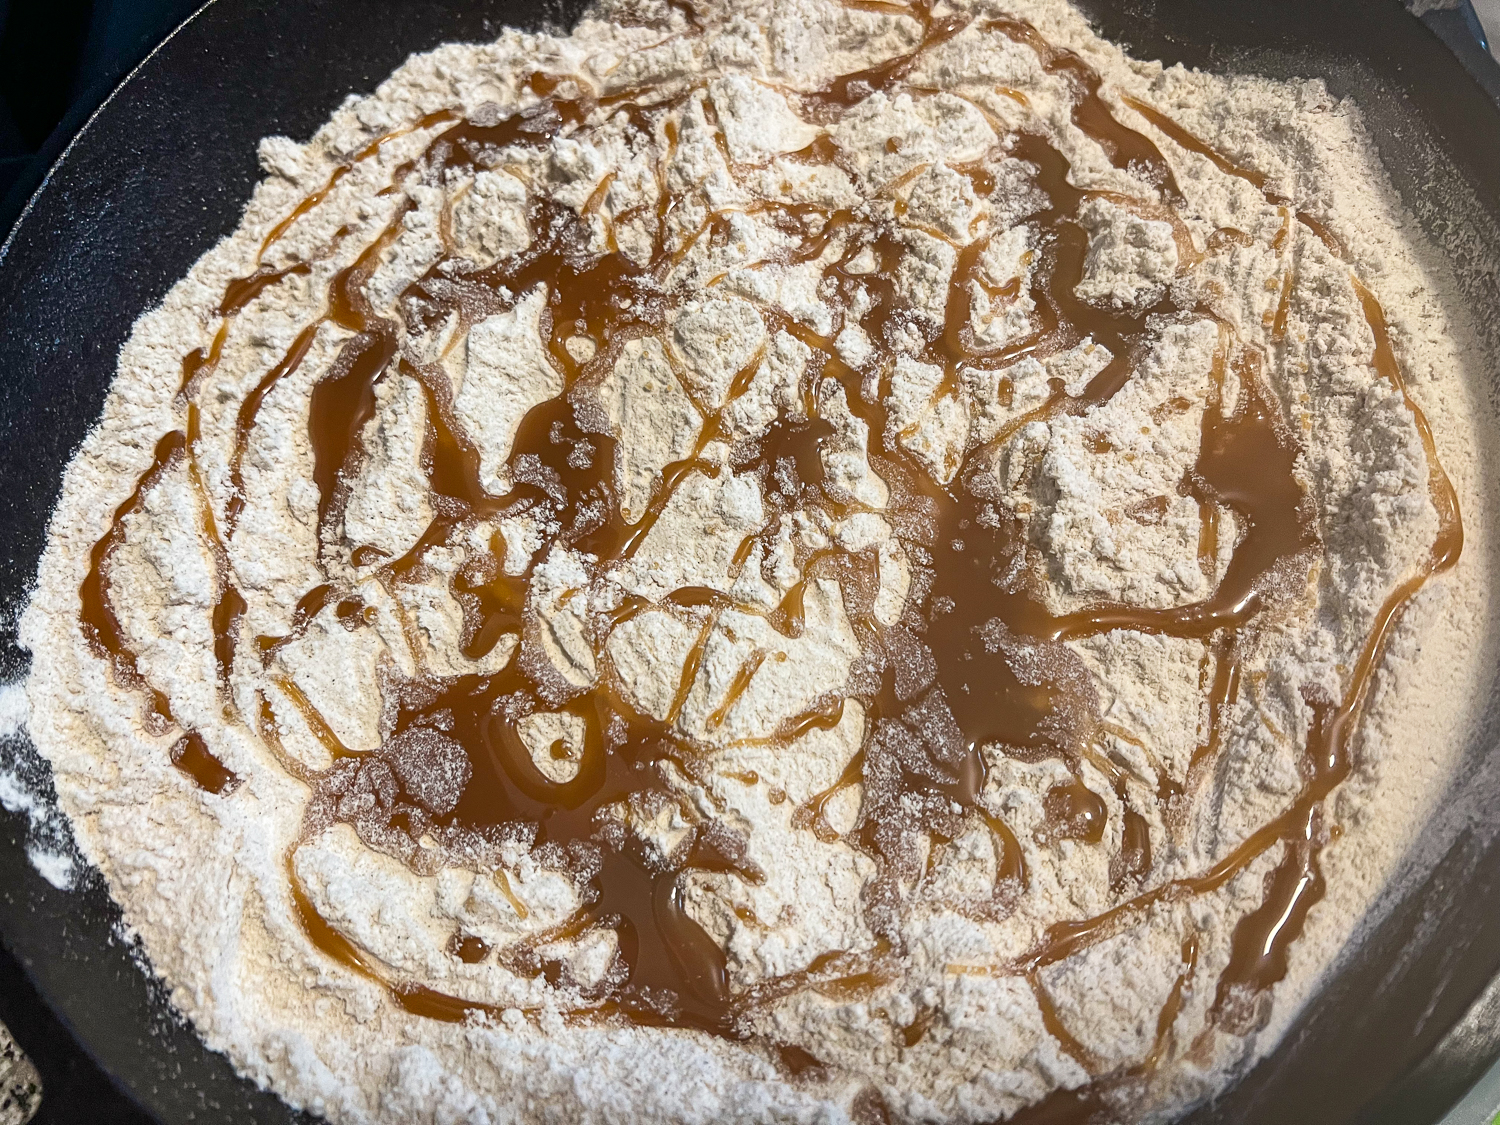 Caramel sauce drizzled over the powedered cake mix.